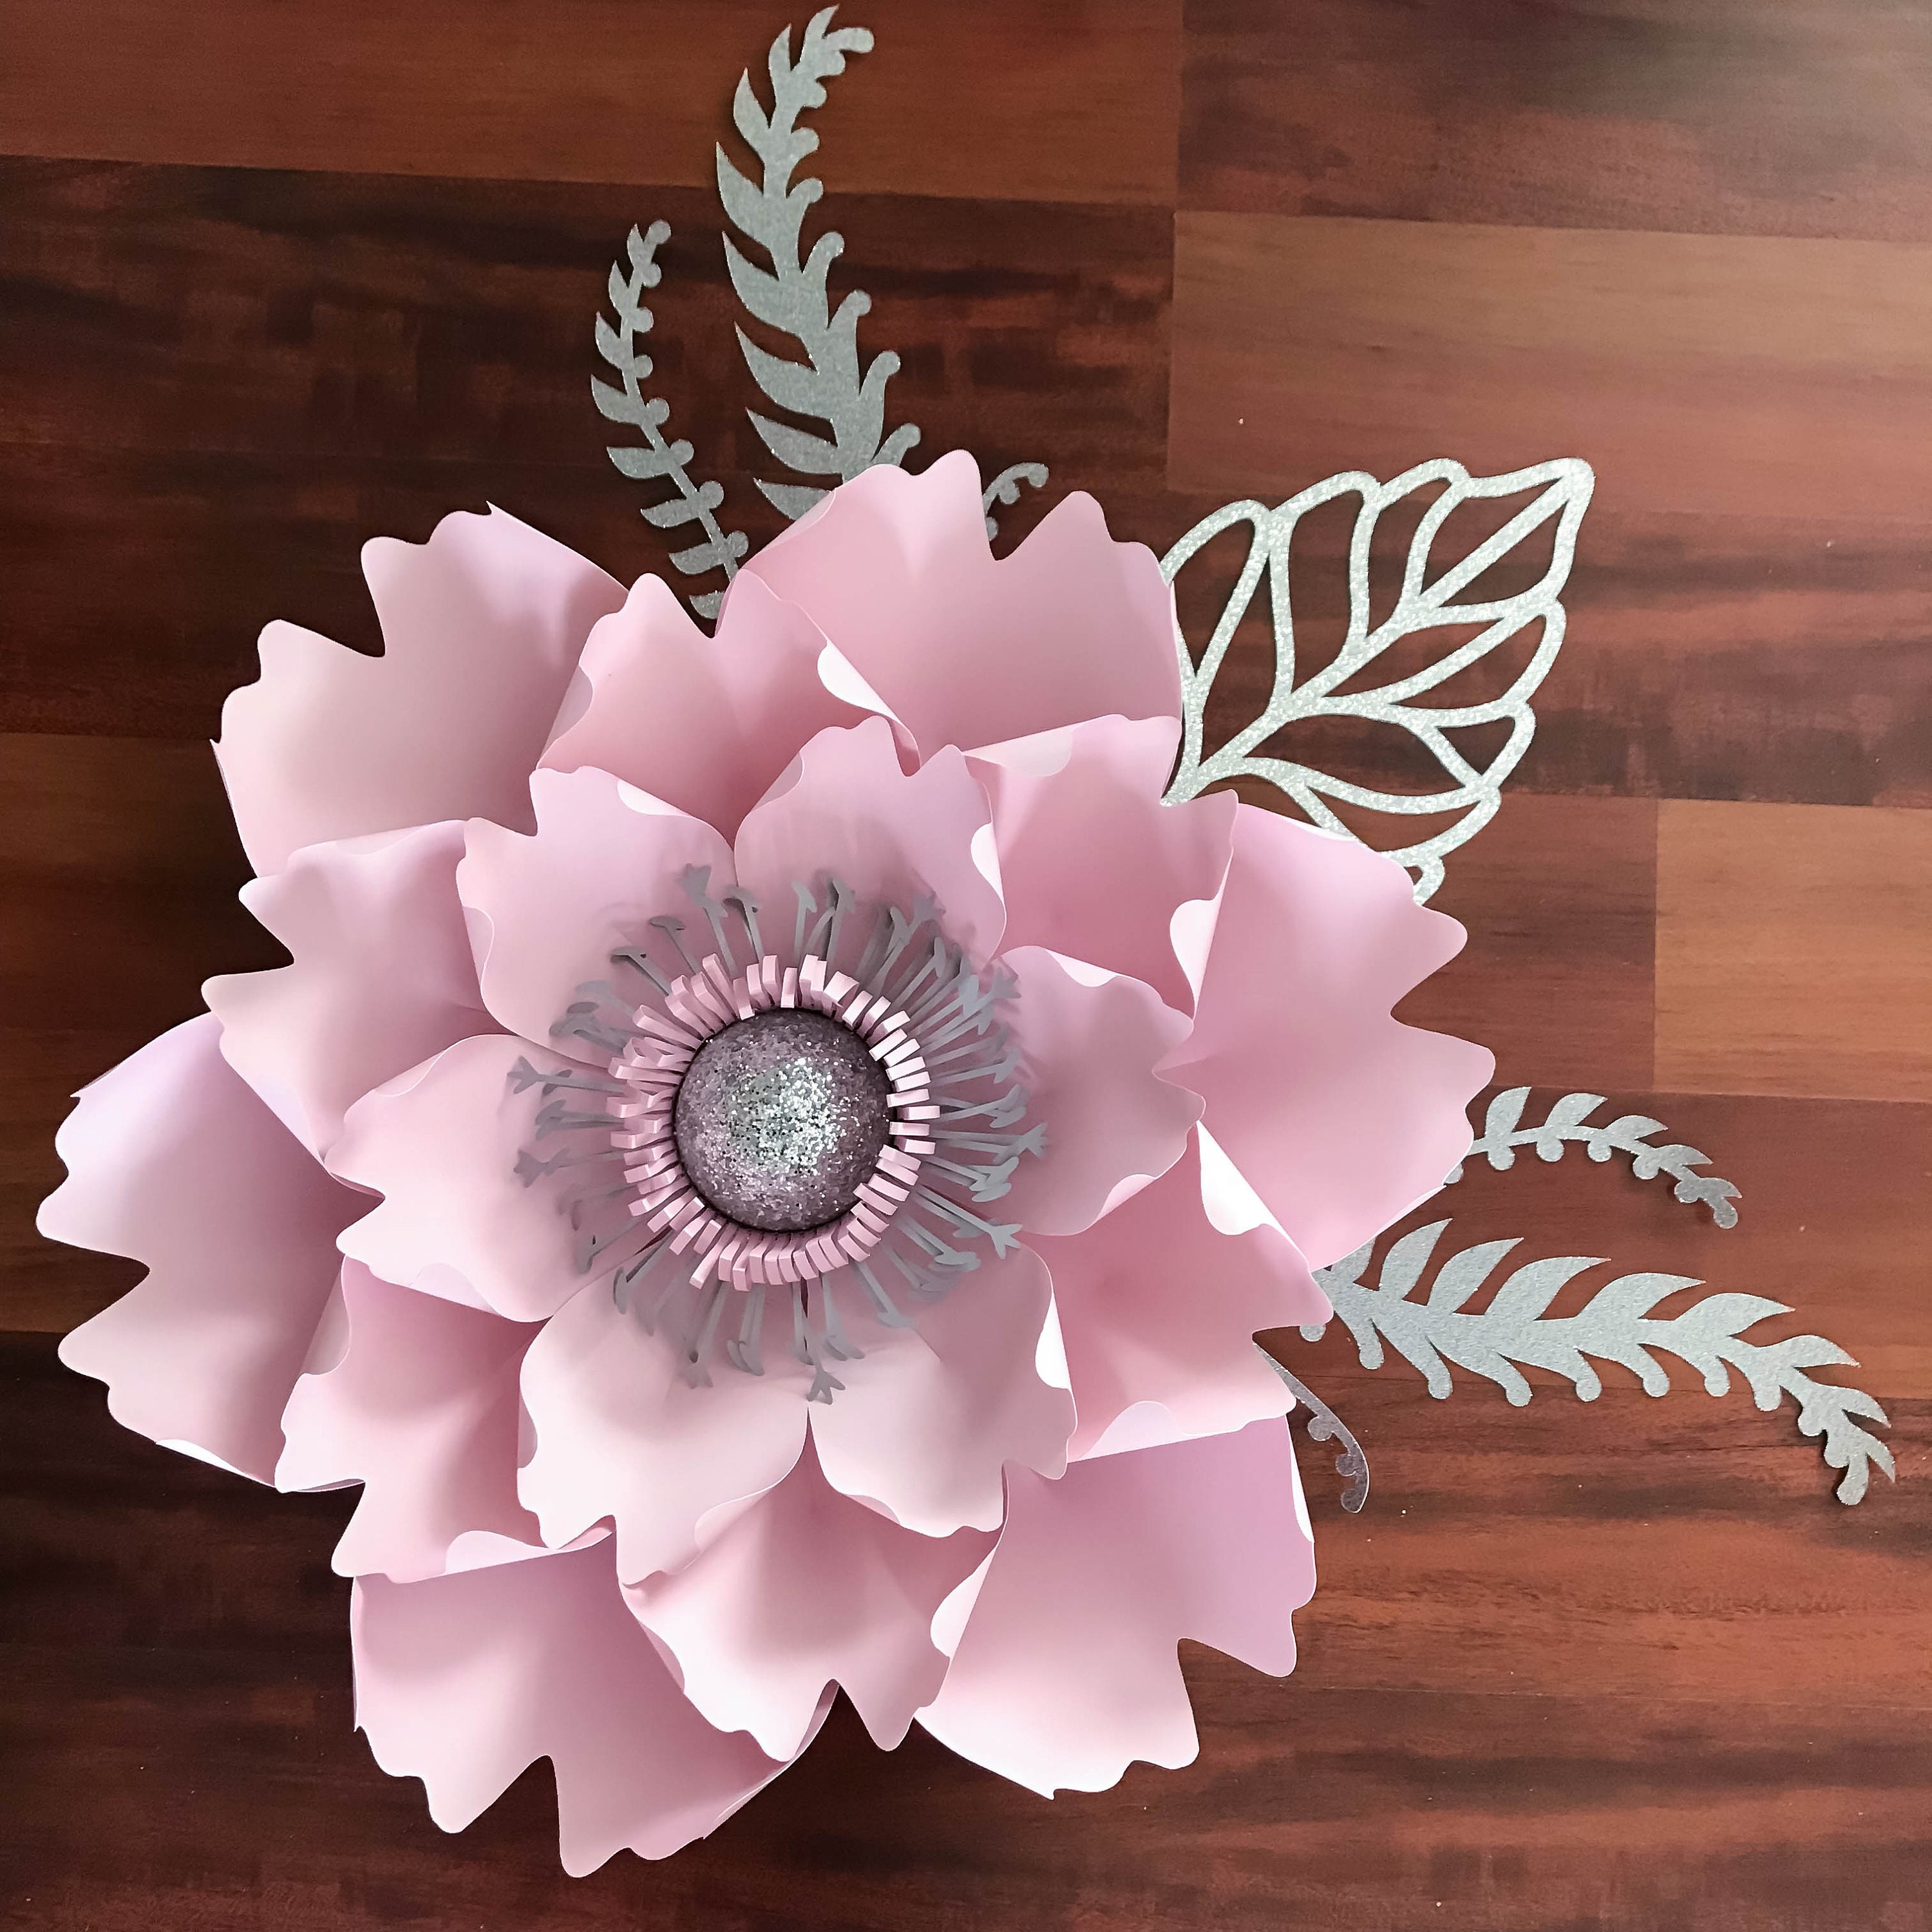 SVG PNG DXF Petal 13 Paper Flower Templates Cut files for Cutting